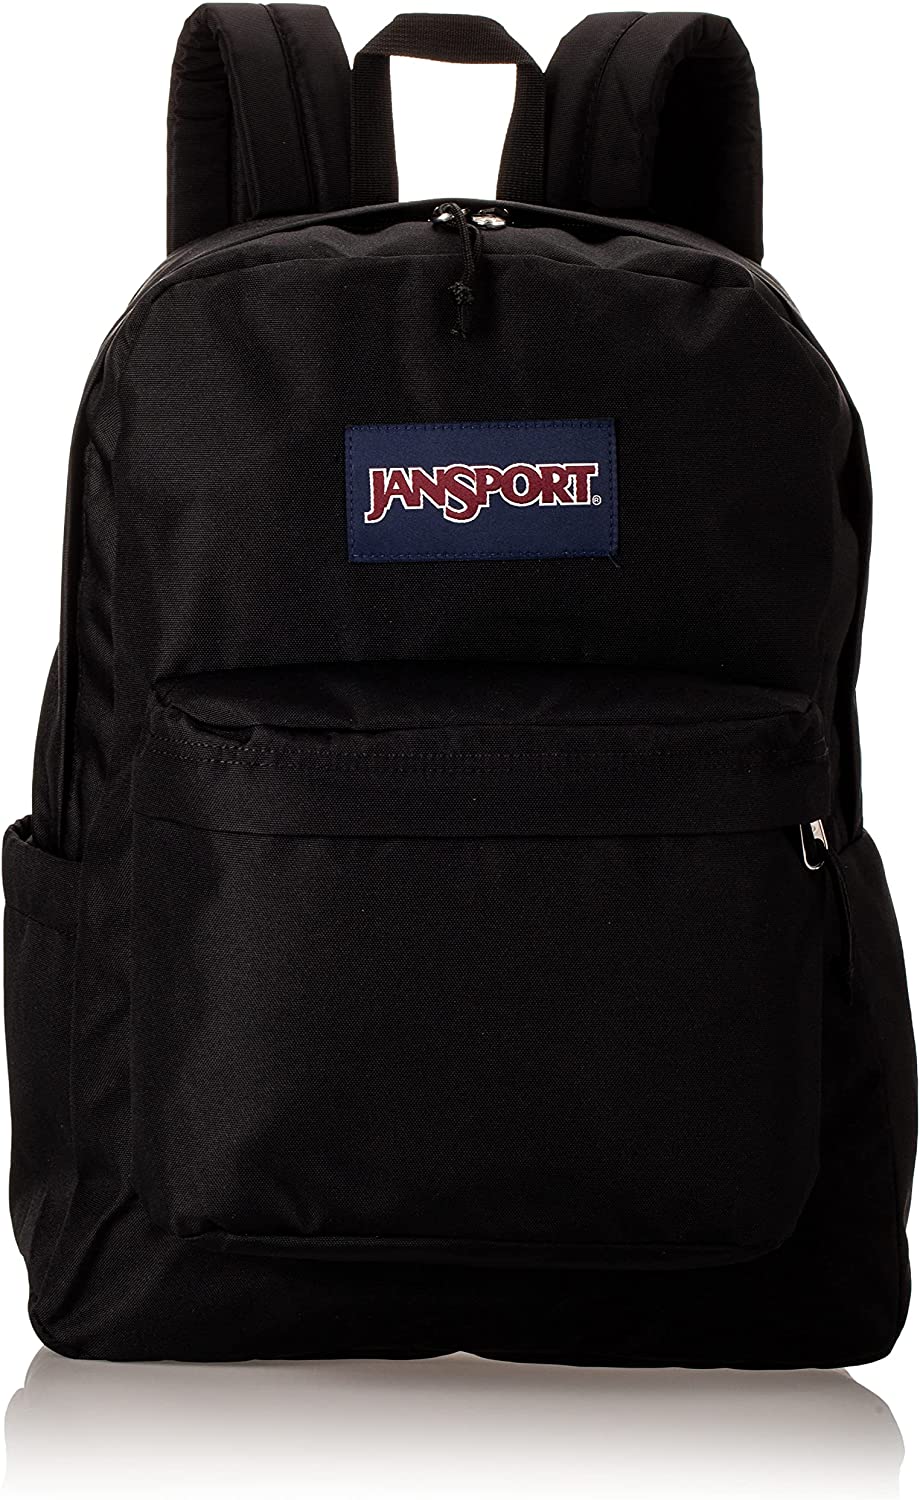 Nico Sport JS0A4QUT008 Superbreak Backpack Black Featuring its classic silhouette, the SuperBreak is ultralight for everyday use. The backpack is available in more than 30 different colors and prints, perfect for every style of self expression. Sport backpacks are the perfect organizational tool to hold all your important items while you are on the move. The sturdy fabric was designed to handle not only daily wear and tear, but the stress caused by heavy weight. Cushioned straps allow for comfortable wear and ease of transport. Sport backpacks have your back!